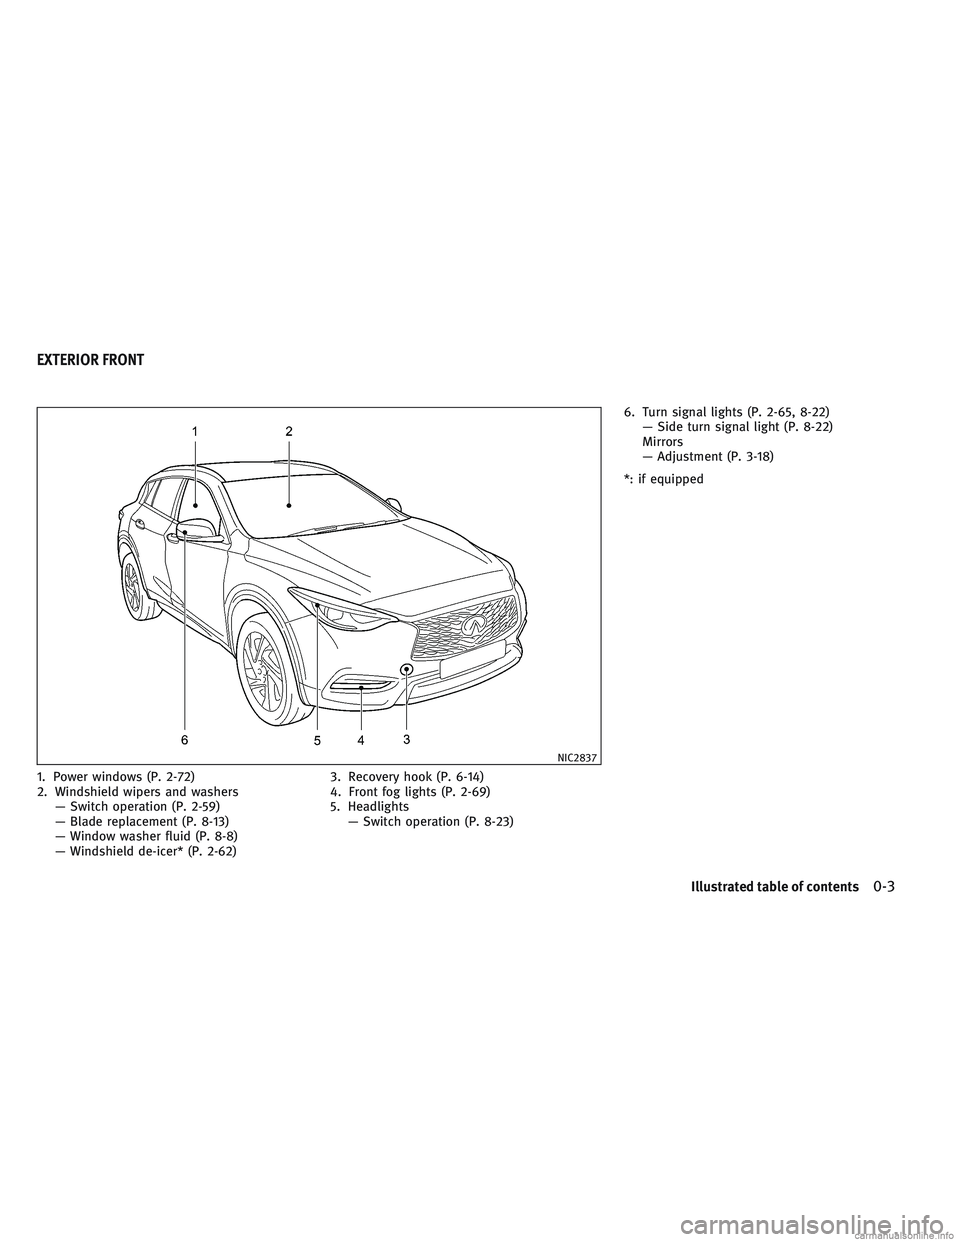 INFINITI QX30 2017  Owners Manual 1. Power windows (P. 2-72)
2. Windshield wipers and washers— Switch operation (P. 2-59)
— Blade replacement (P. 8-13)
— Window washer fluid (P. 8-8)
— Windshield de-icer* (P. 2-62) 3. Recovery